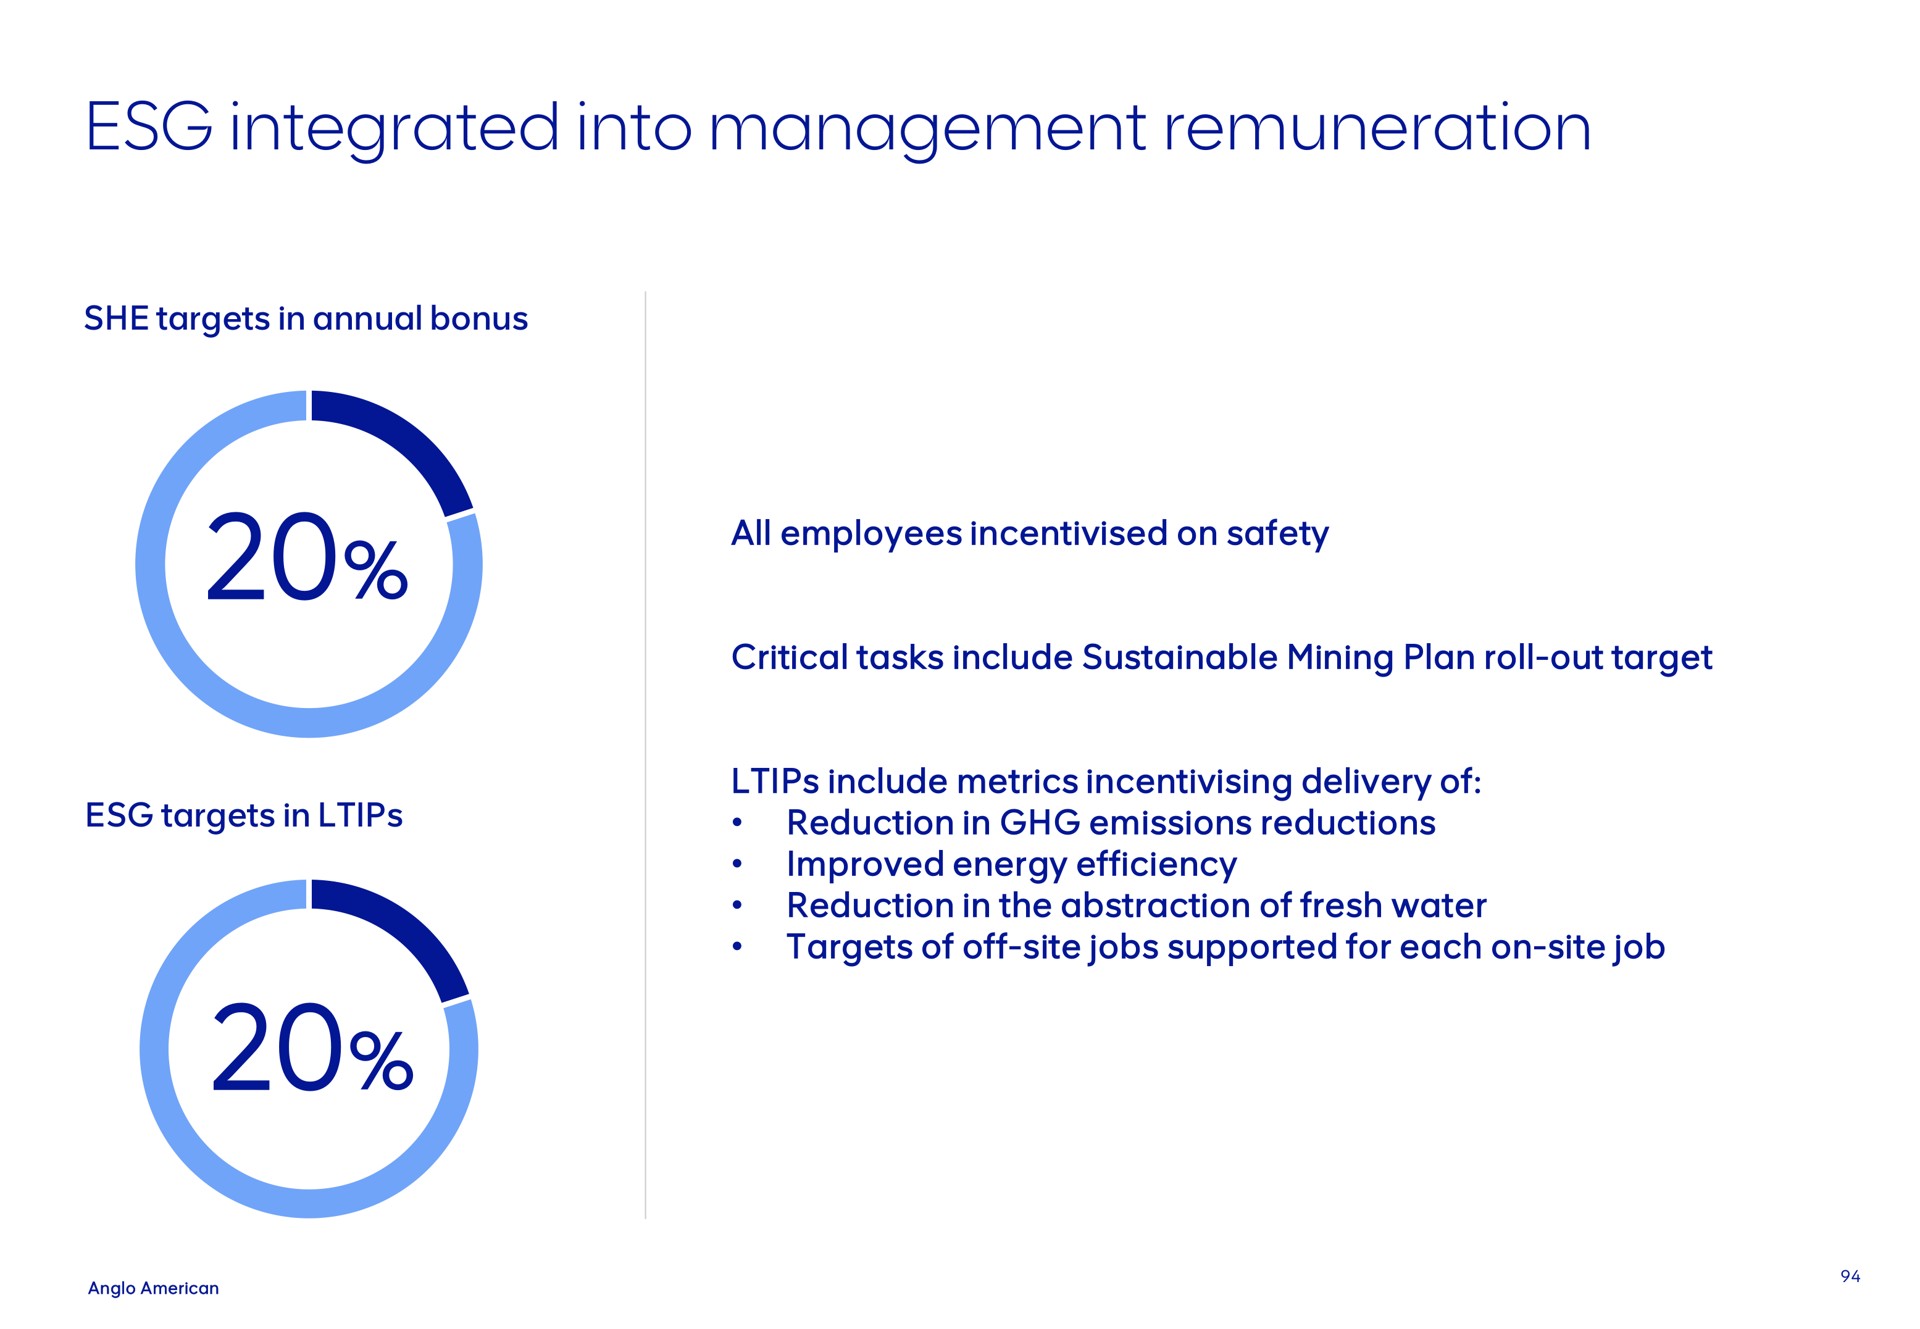 integrated into management remuneration she targets in annual bonus targets in all employees on safety critical tasks include sustainable mining plan roll out target include metrics delivery of reduction in emissions reductions improved energy efficiency reduction in the abstraction of fresh water targets of off site jobs supported for each on site job | AngloAmerican